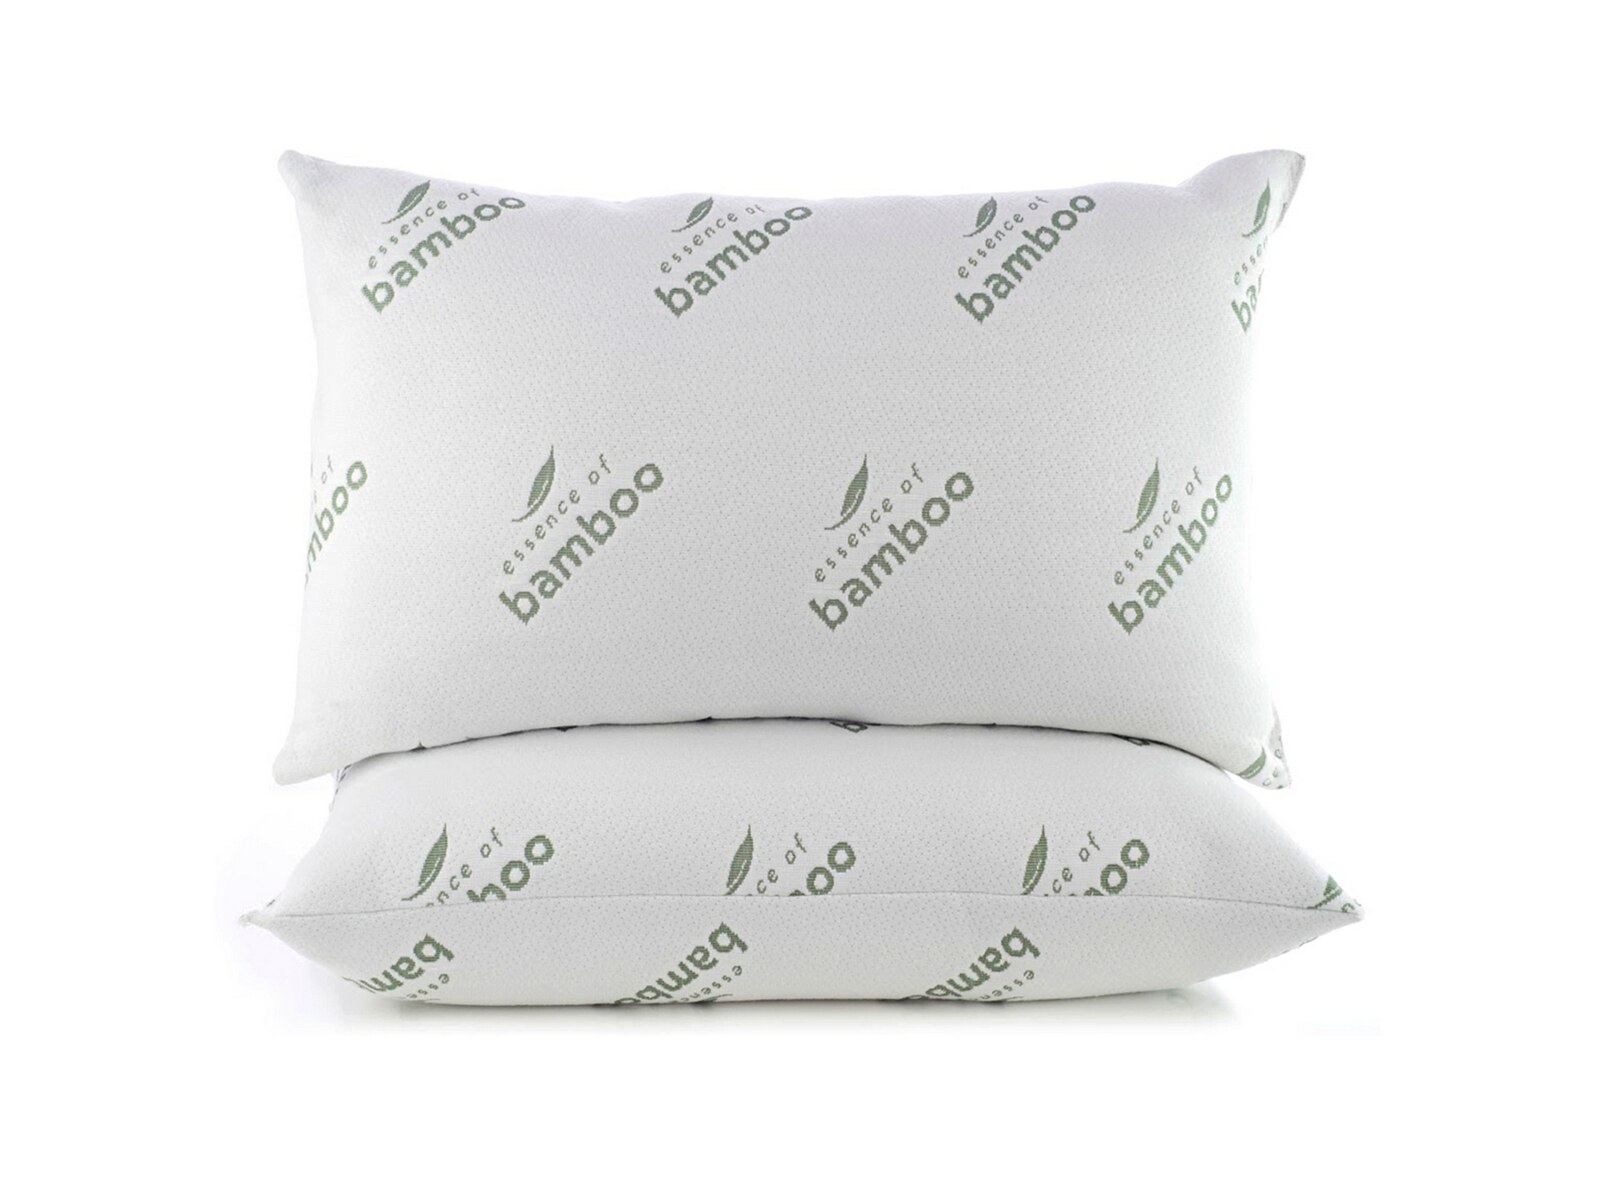 Essence of Bamboo Pillows - 2 Pack